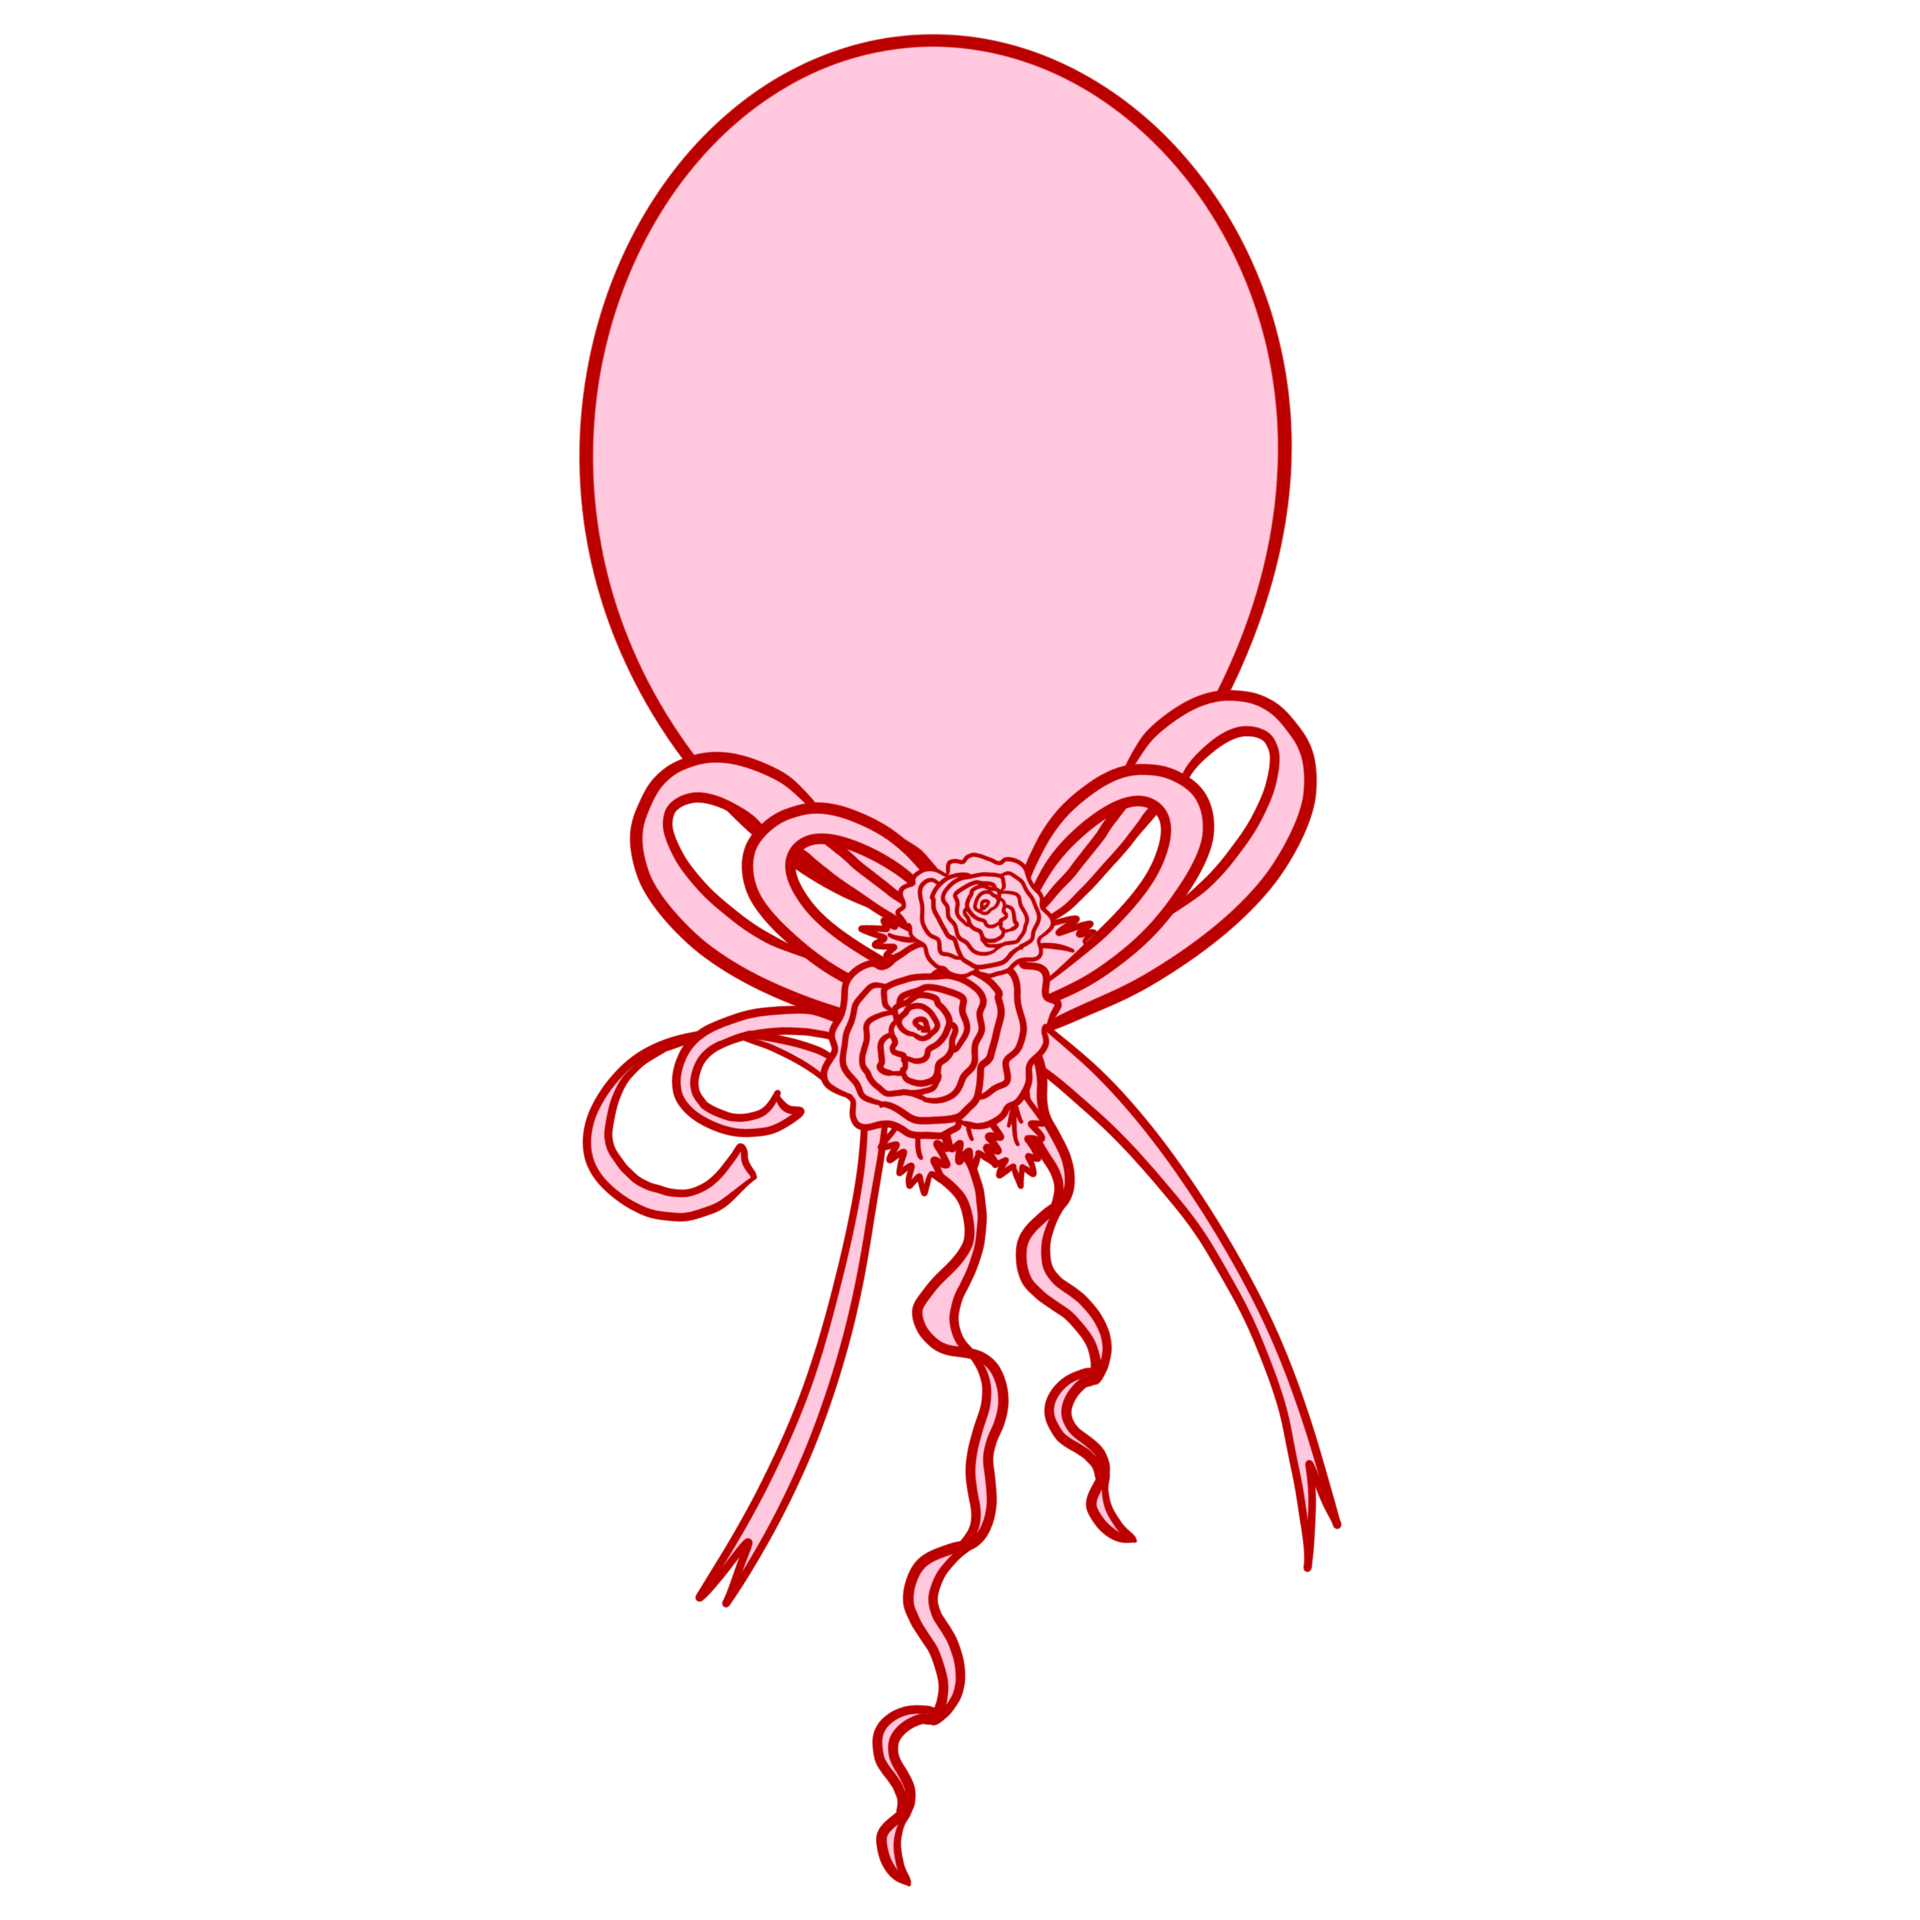 Balloon String Png - Real Balloon Pink Png, Transparent Png , Transparent  Png Image